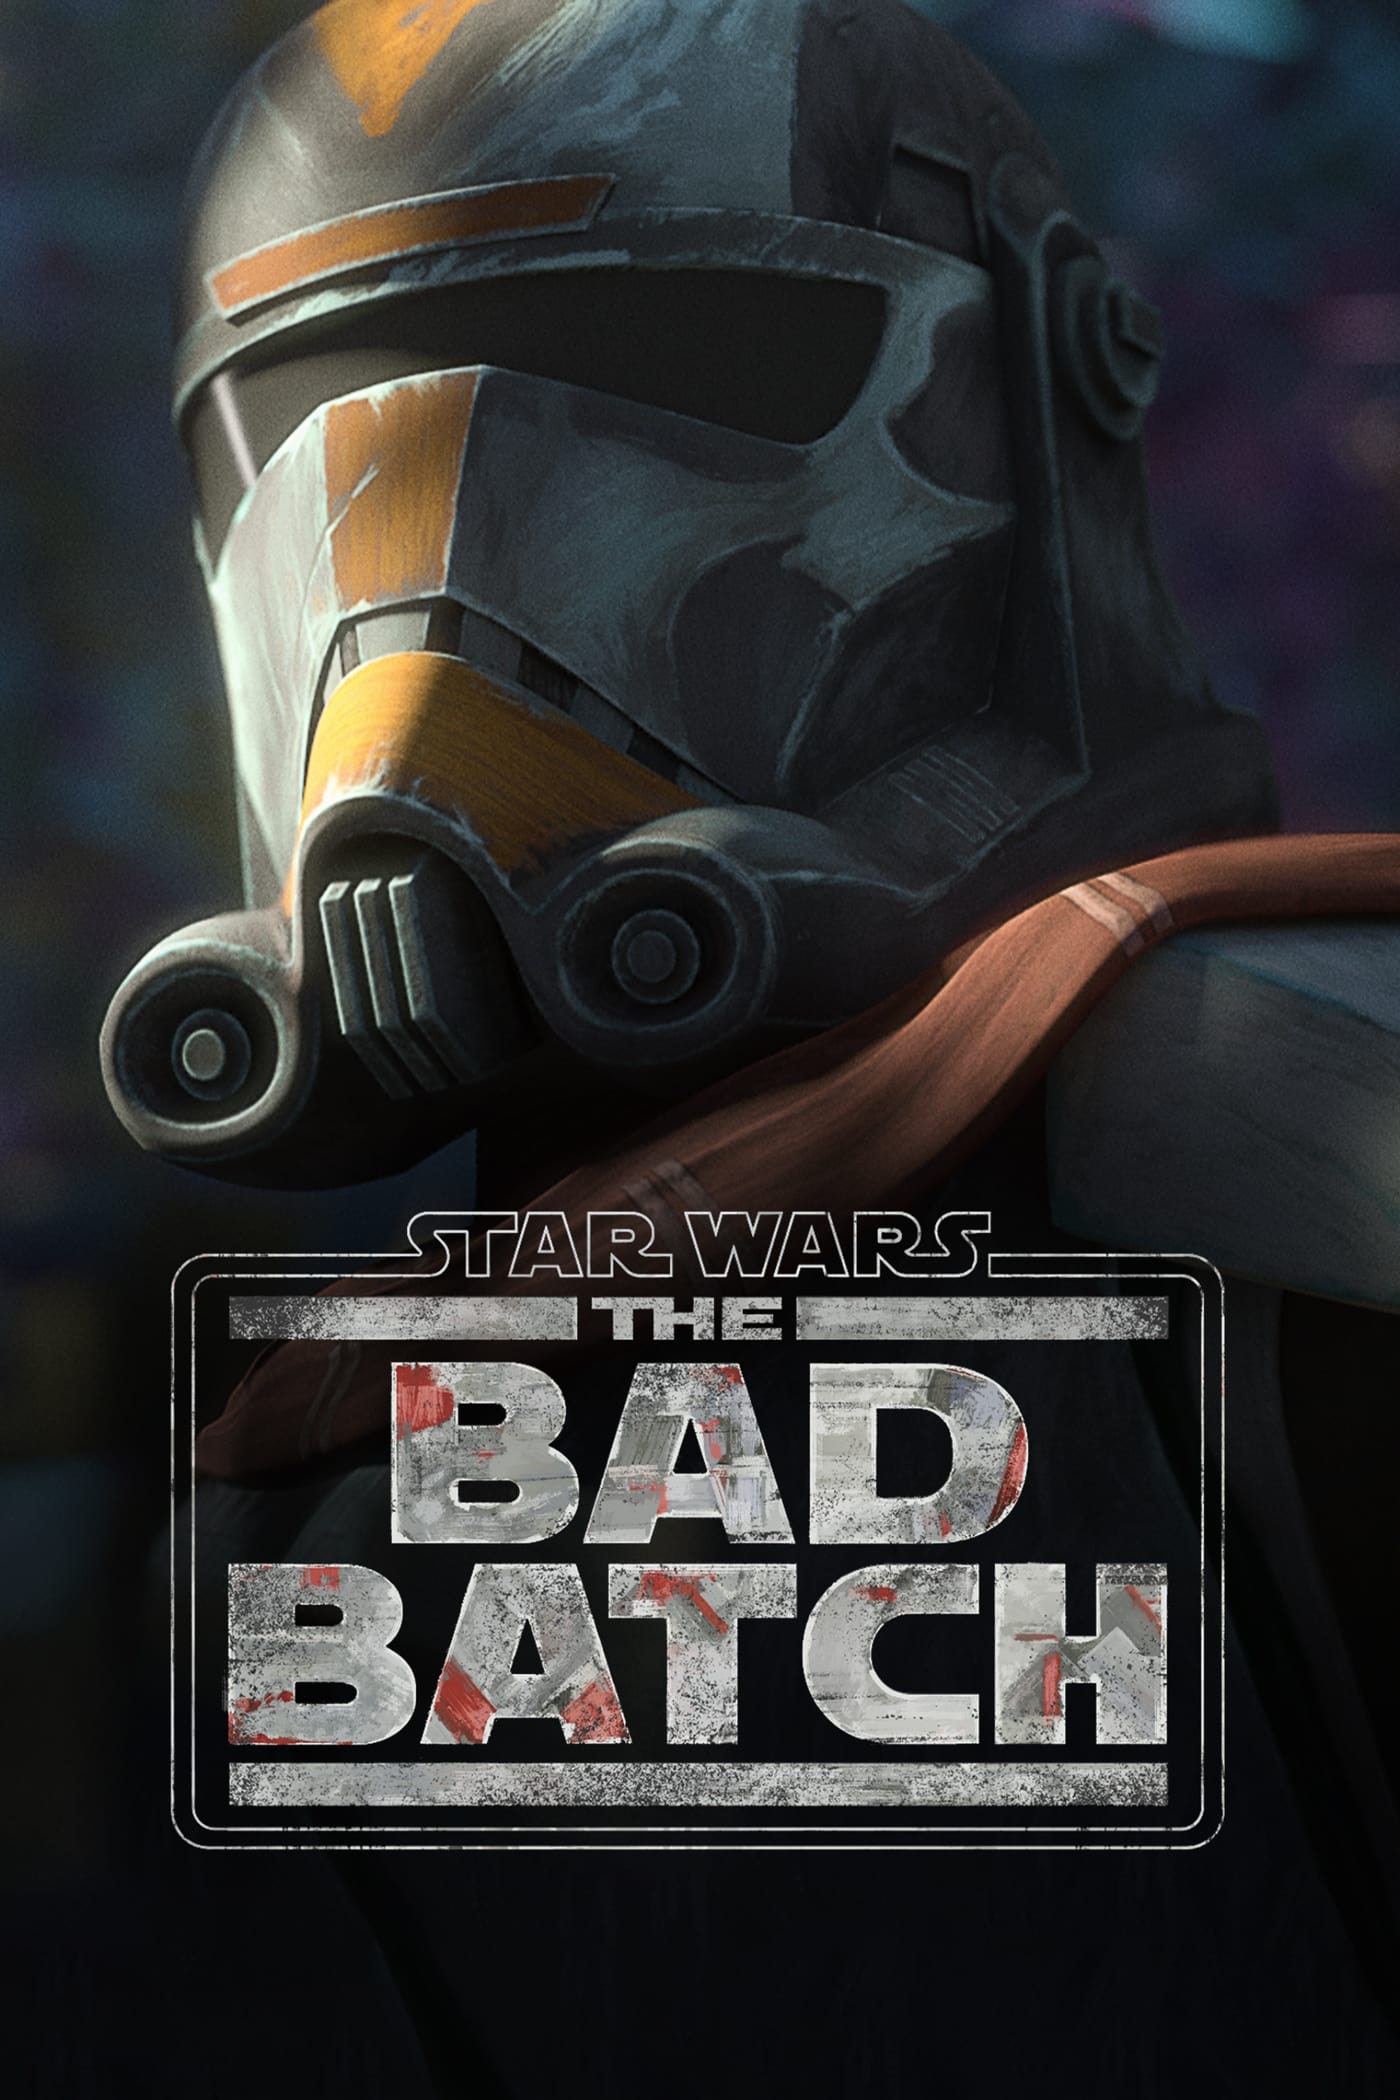 Star Wars: The Bad Batch” Season 2 air dates and episode guide are available on Disney+